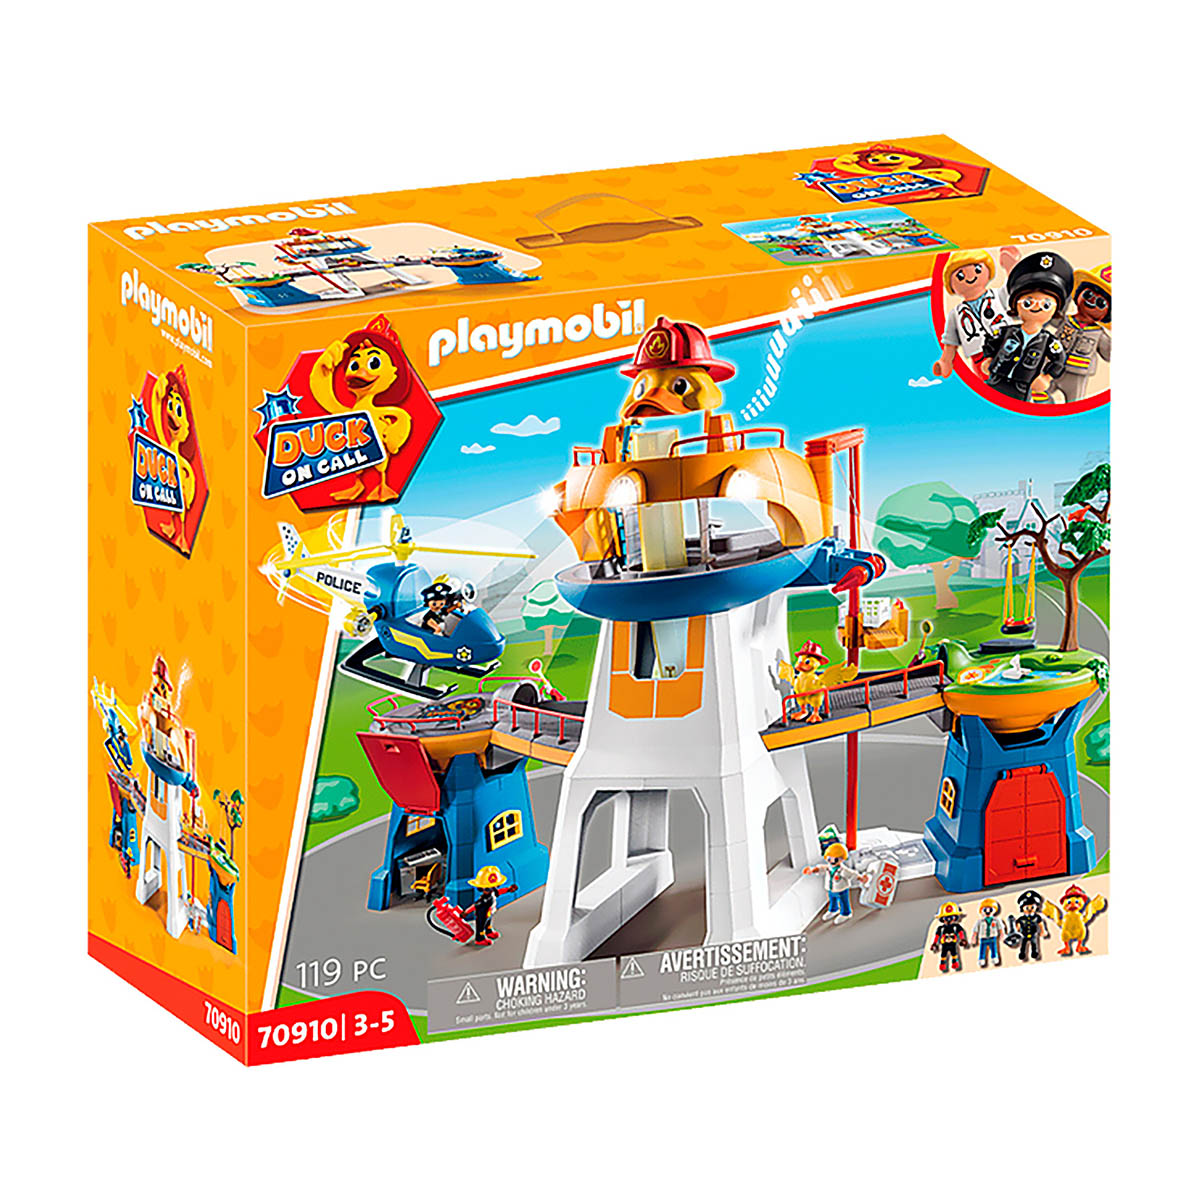 Playmobil - A Sede - Duck On Call - 70910